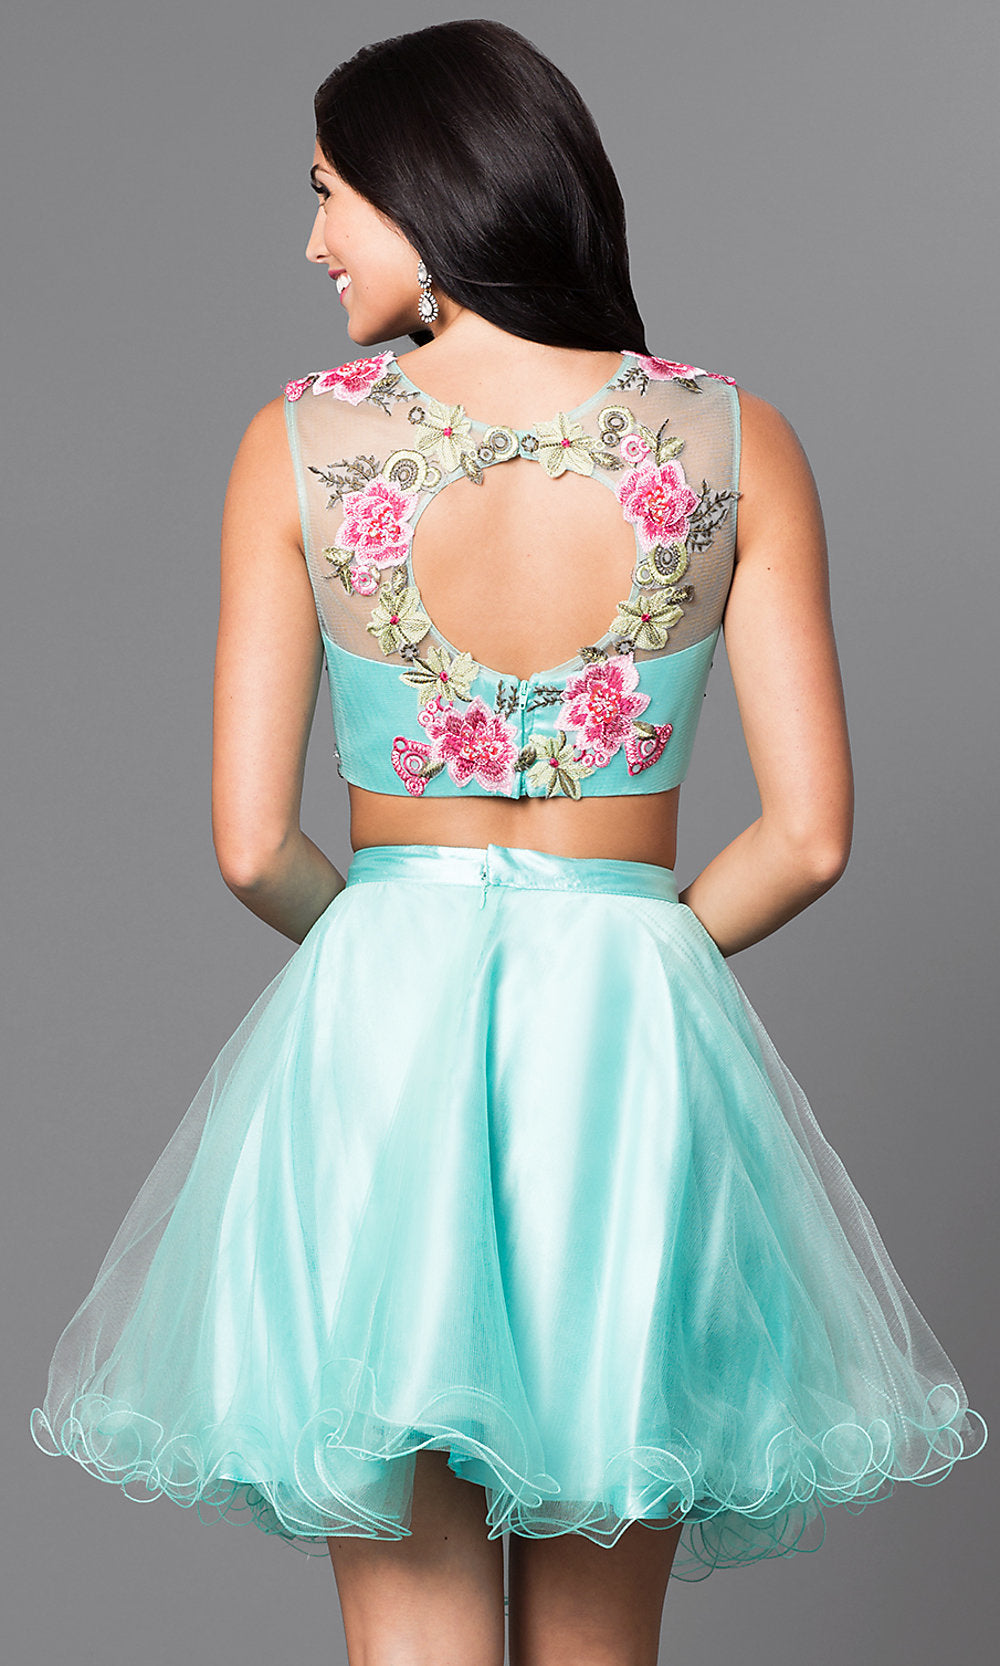  Two-Piece Embroidered Short Homecoming Dress